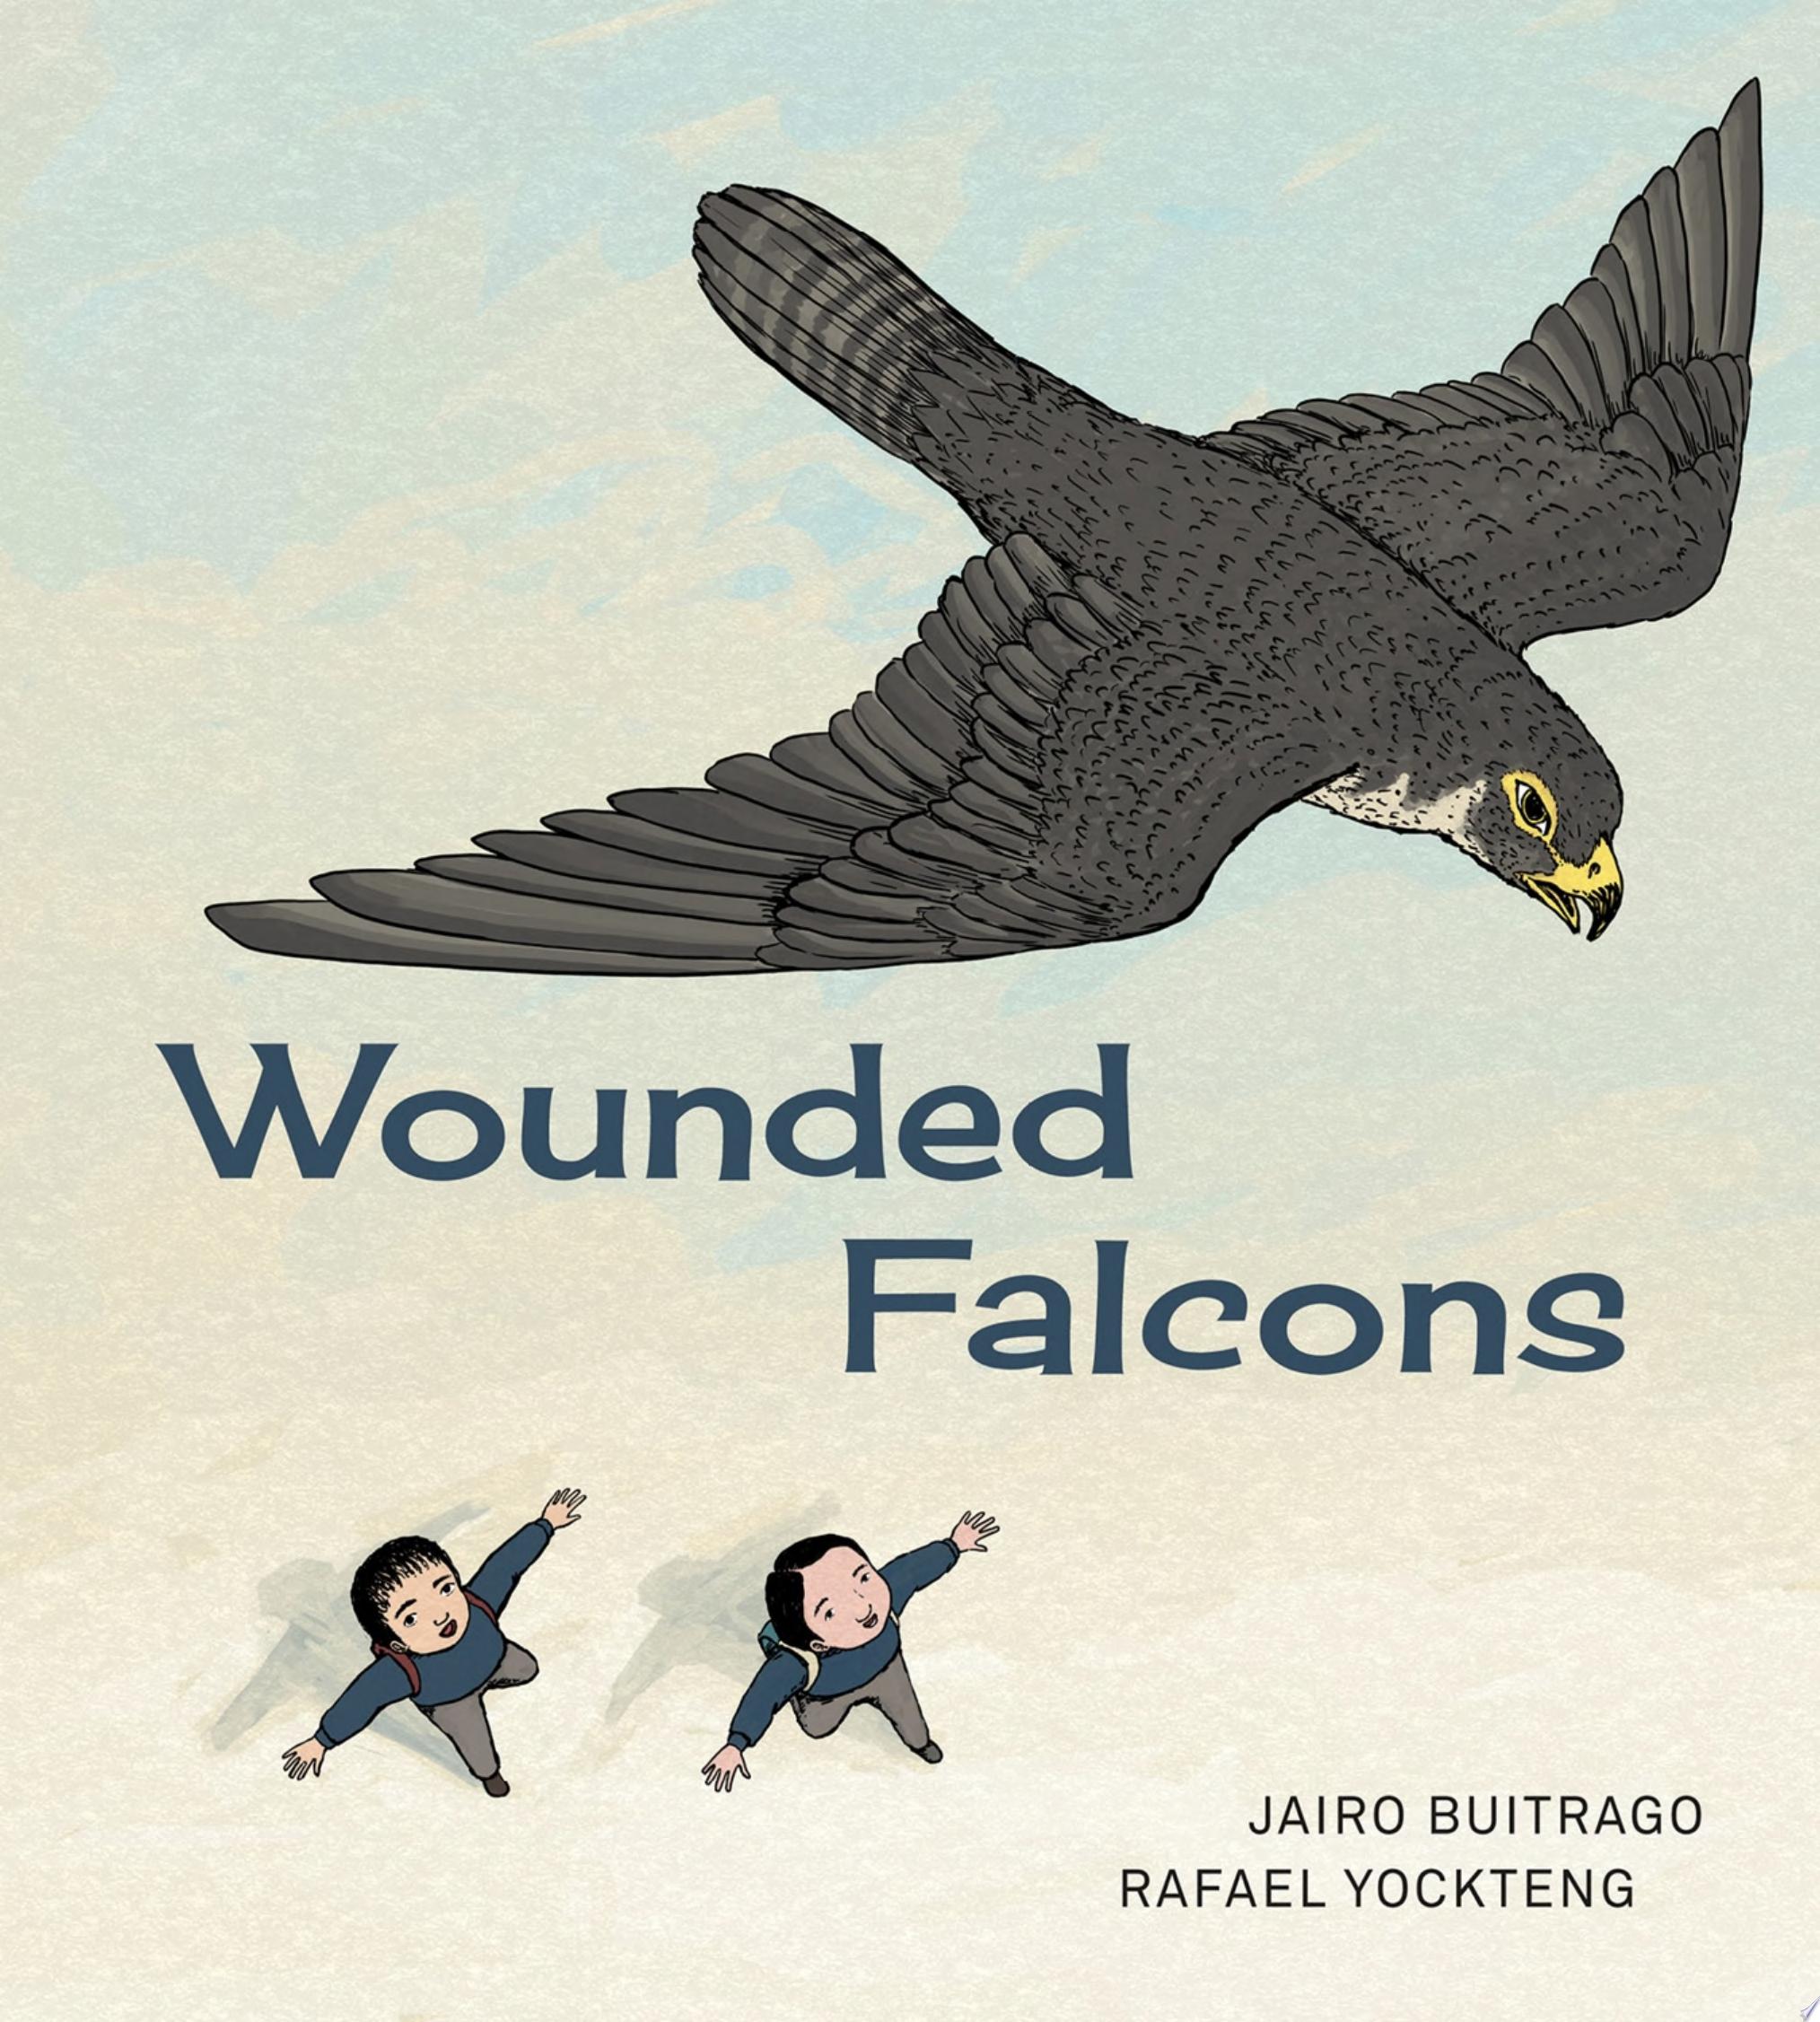 Image for "Wounded Falcons"